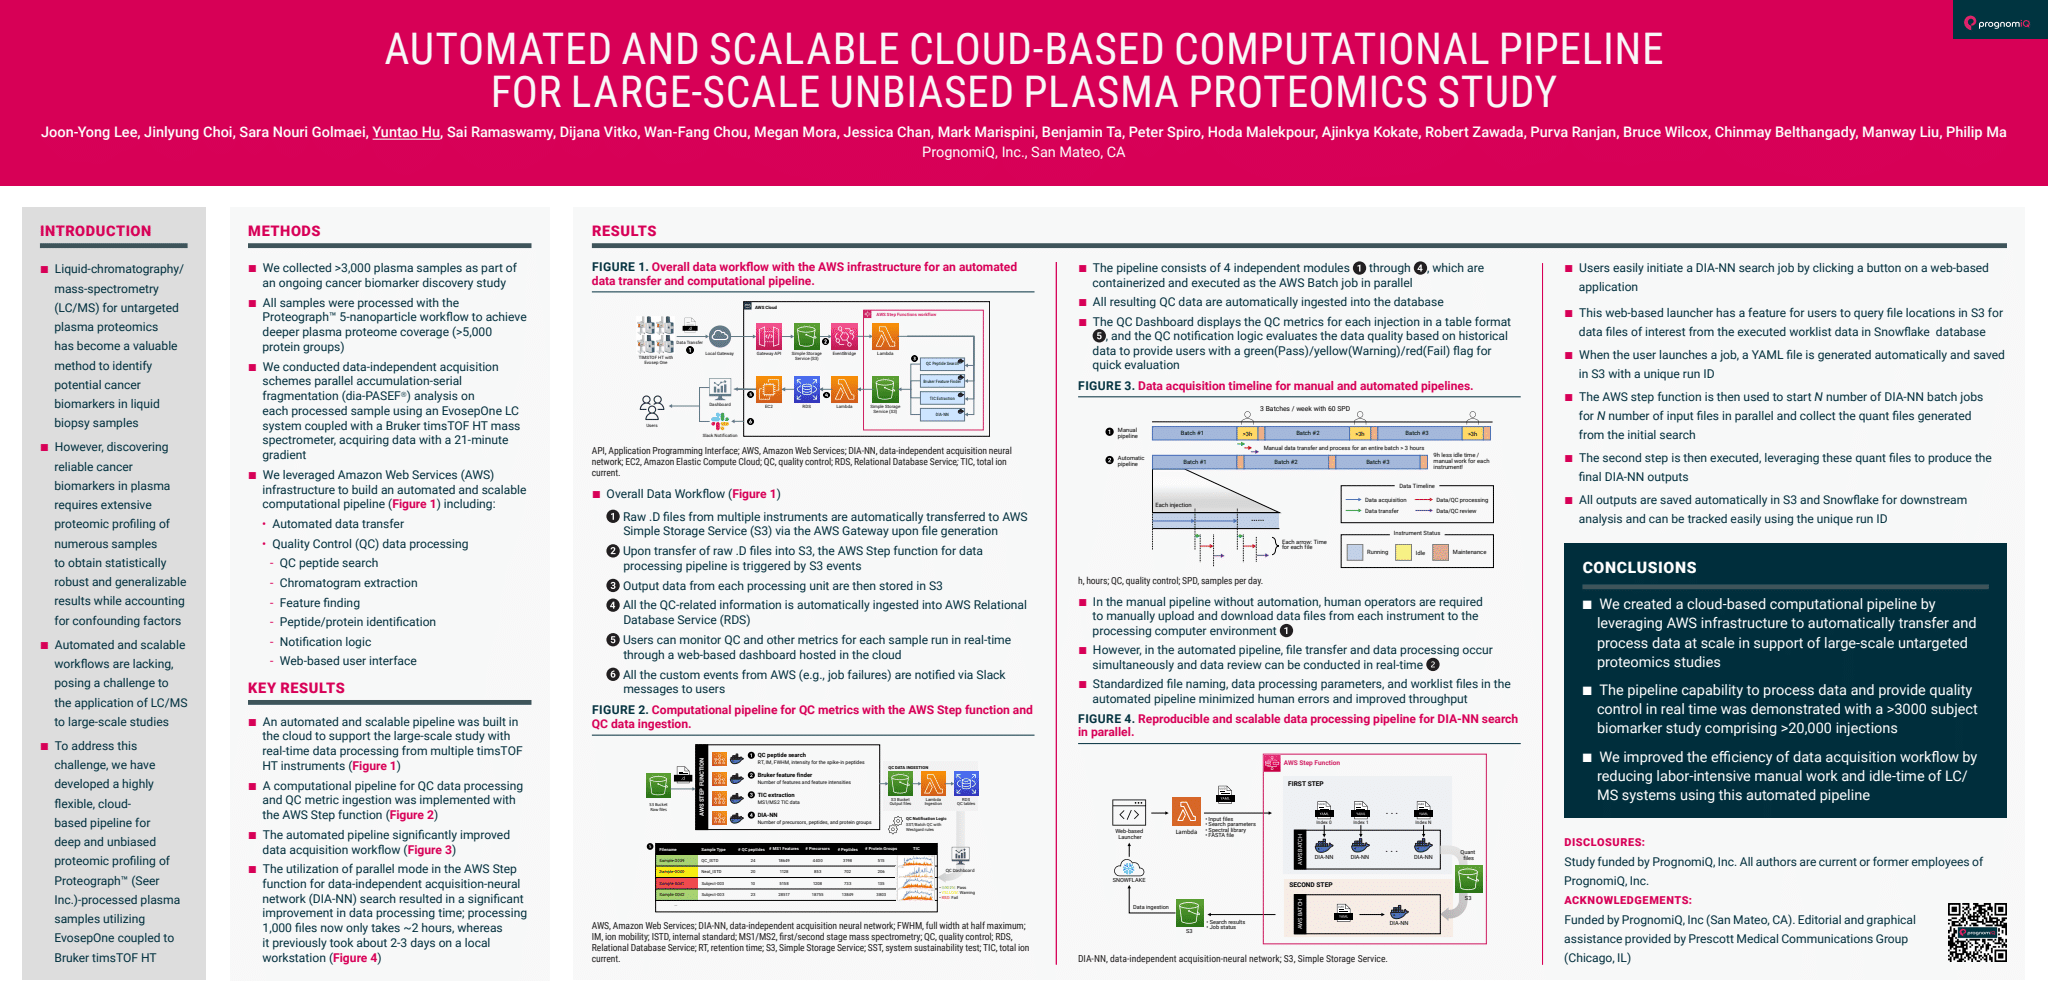 scientific poster showing an automated and scalable cloud-based computational pipeline for large-scale unbiased plasma proteomics study